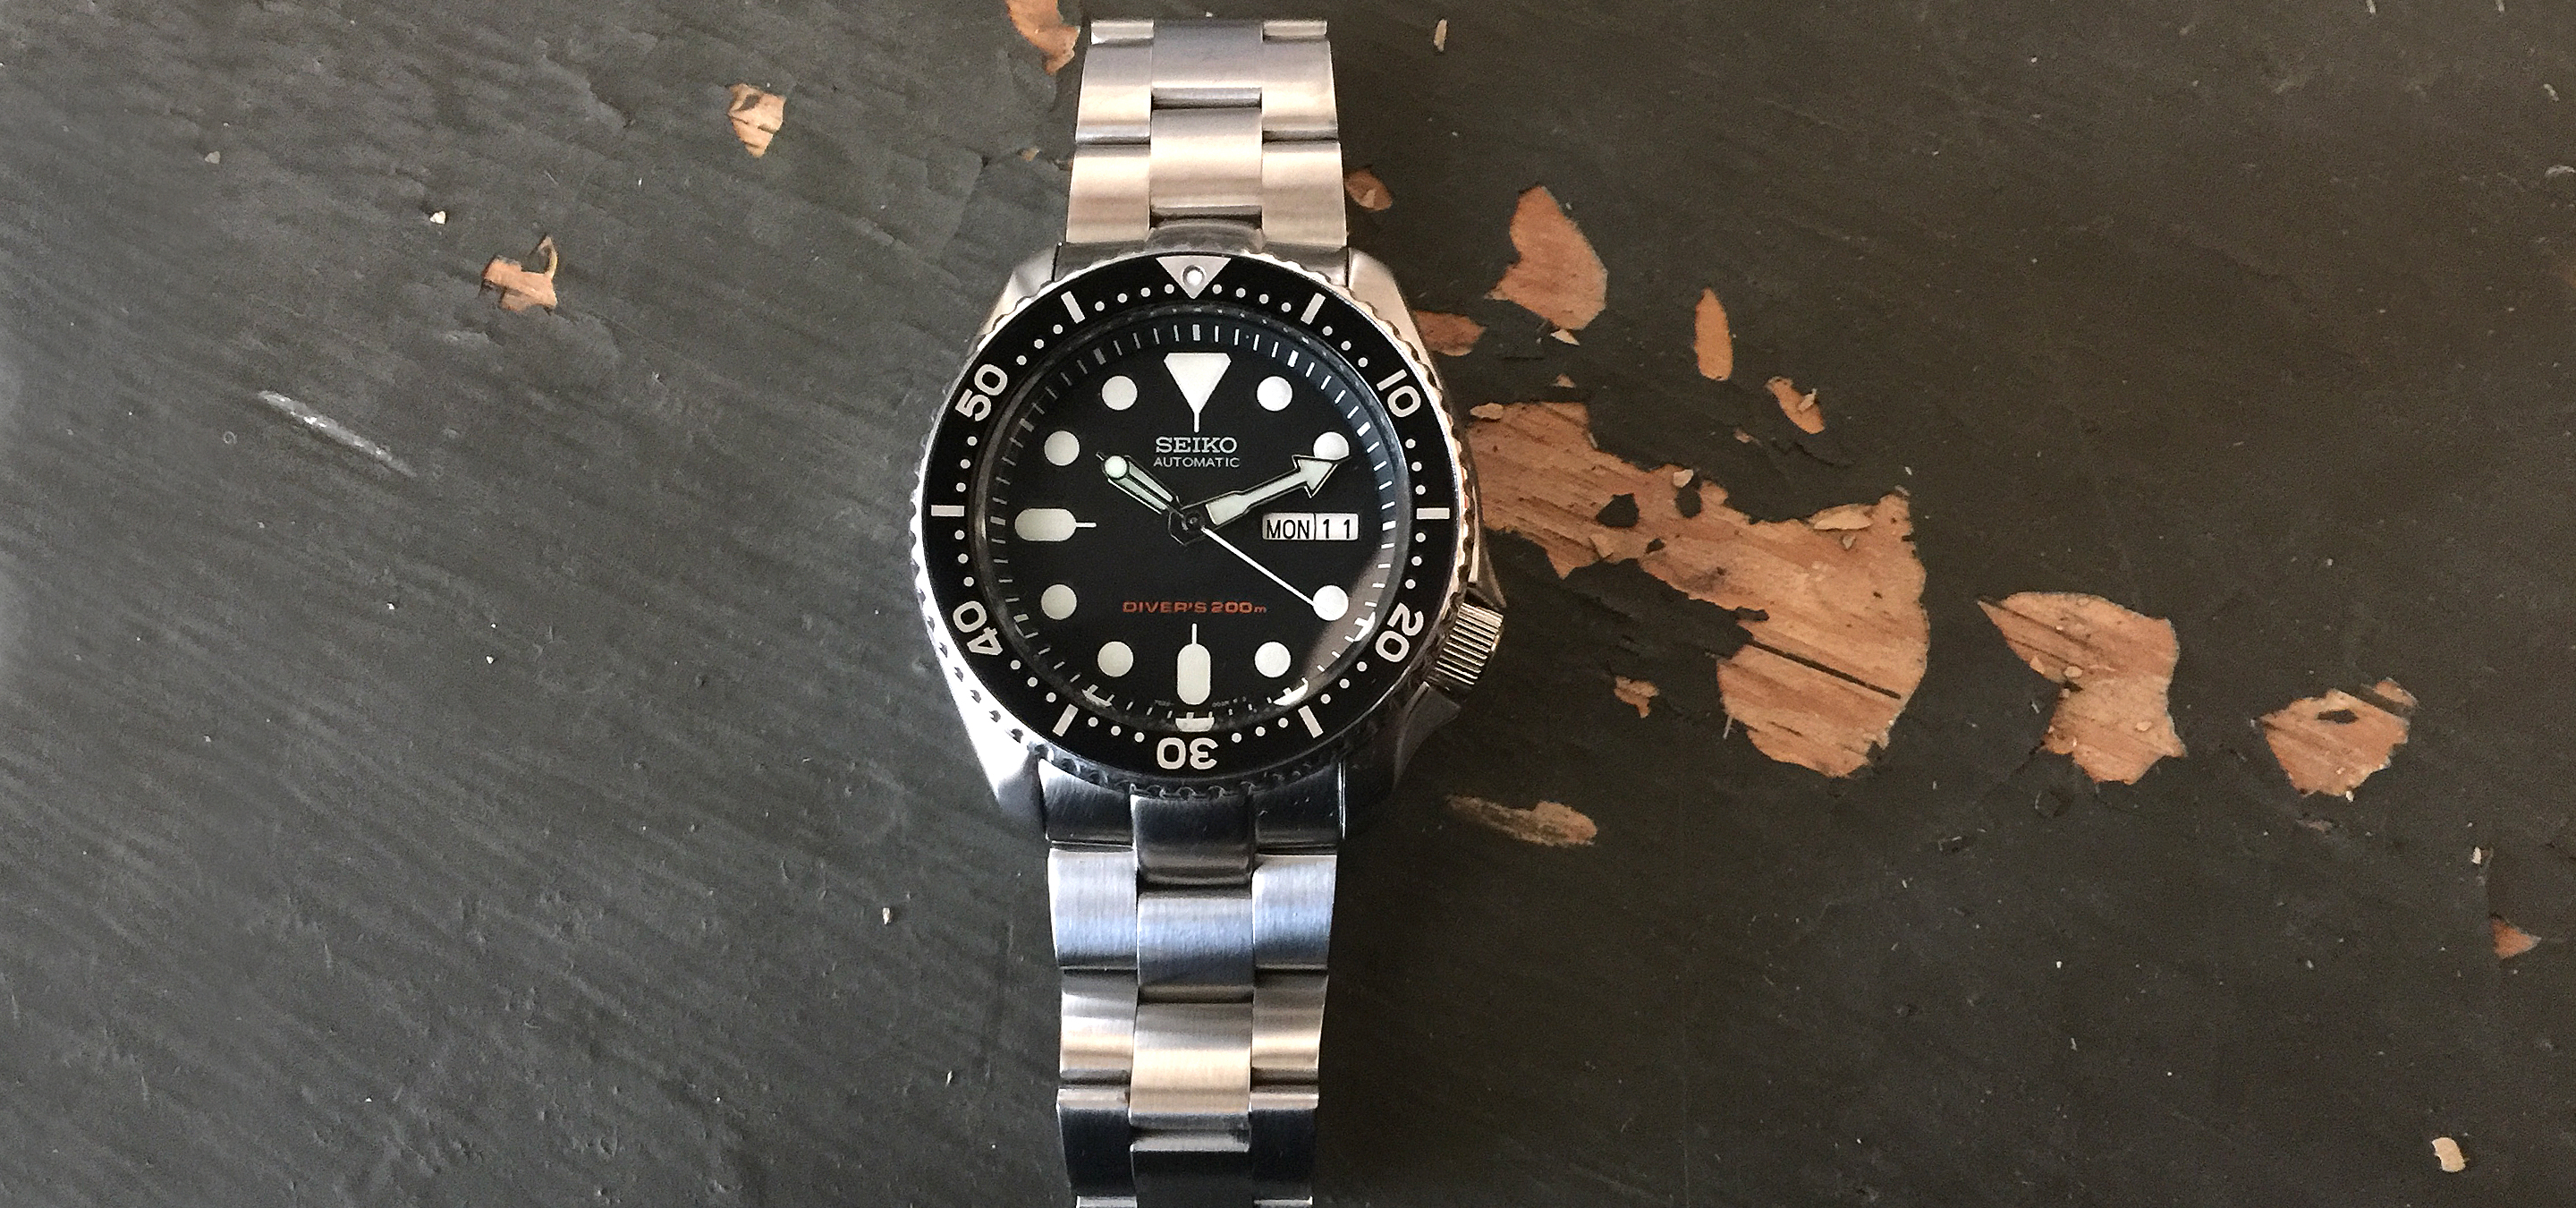 SKX007: The Seiko Dive Watch that Doesn't Sink the Bank - ITS Tactical